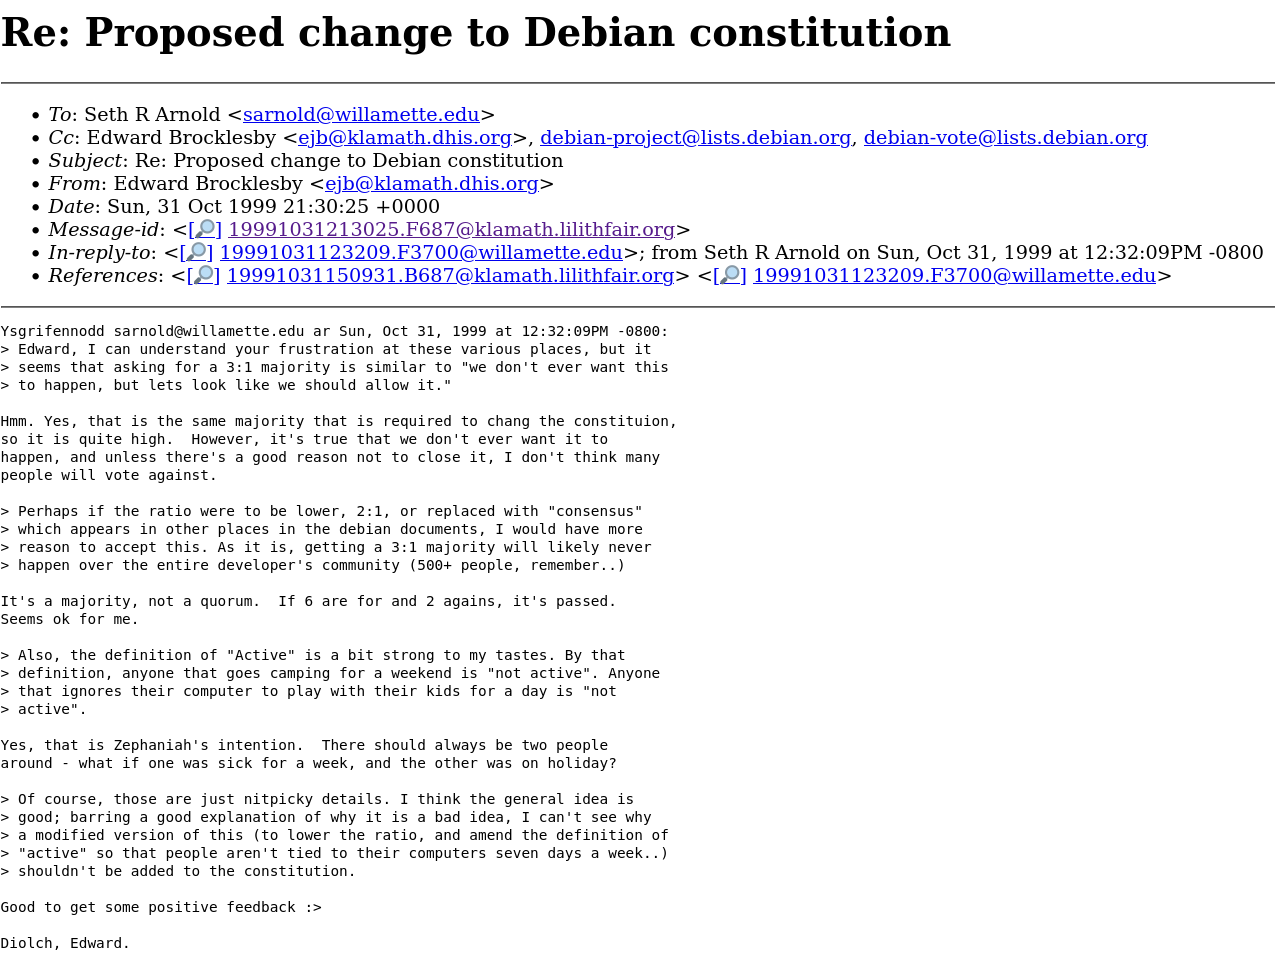 Re: Proposed change to Debian constitution